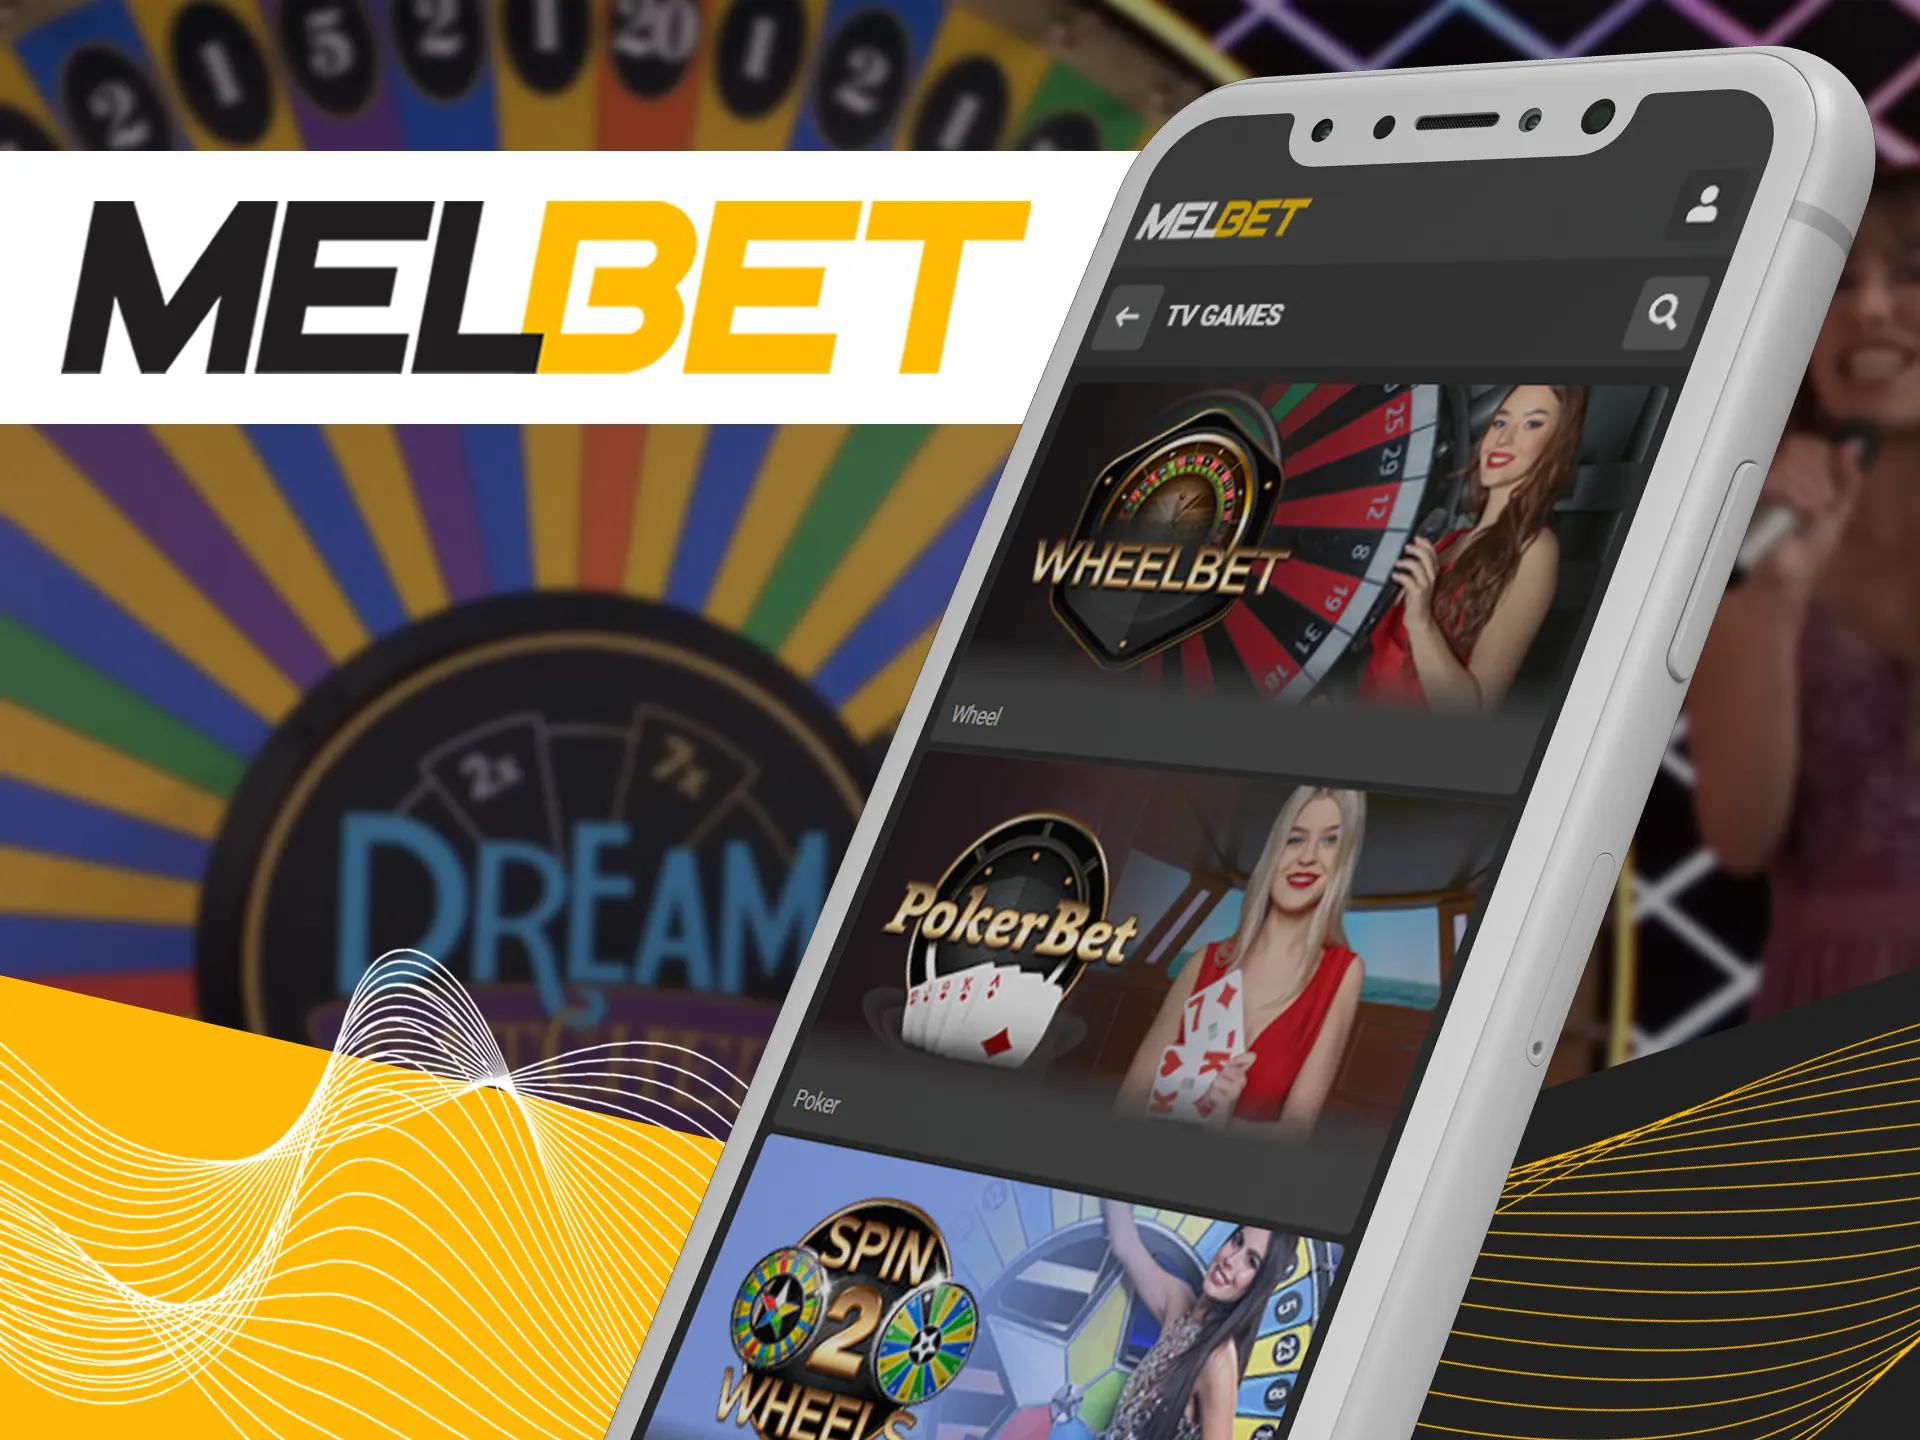 Bet on results of TV games at Melbet.